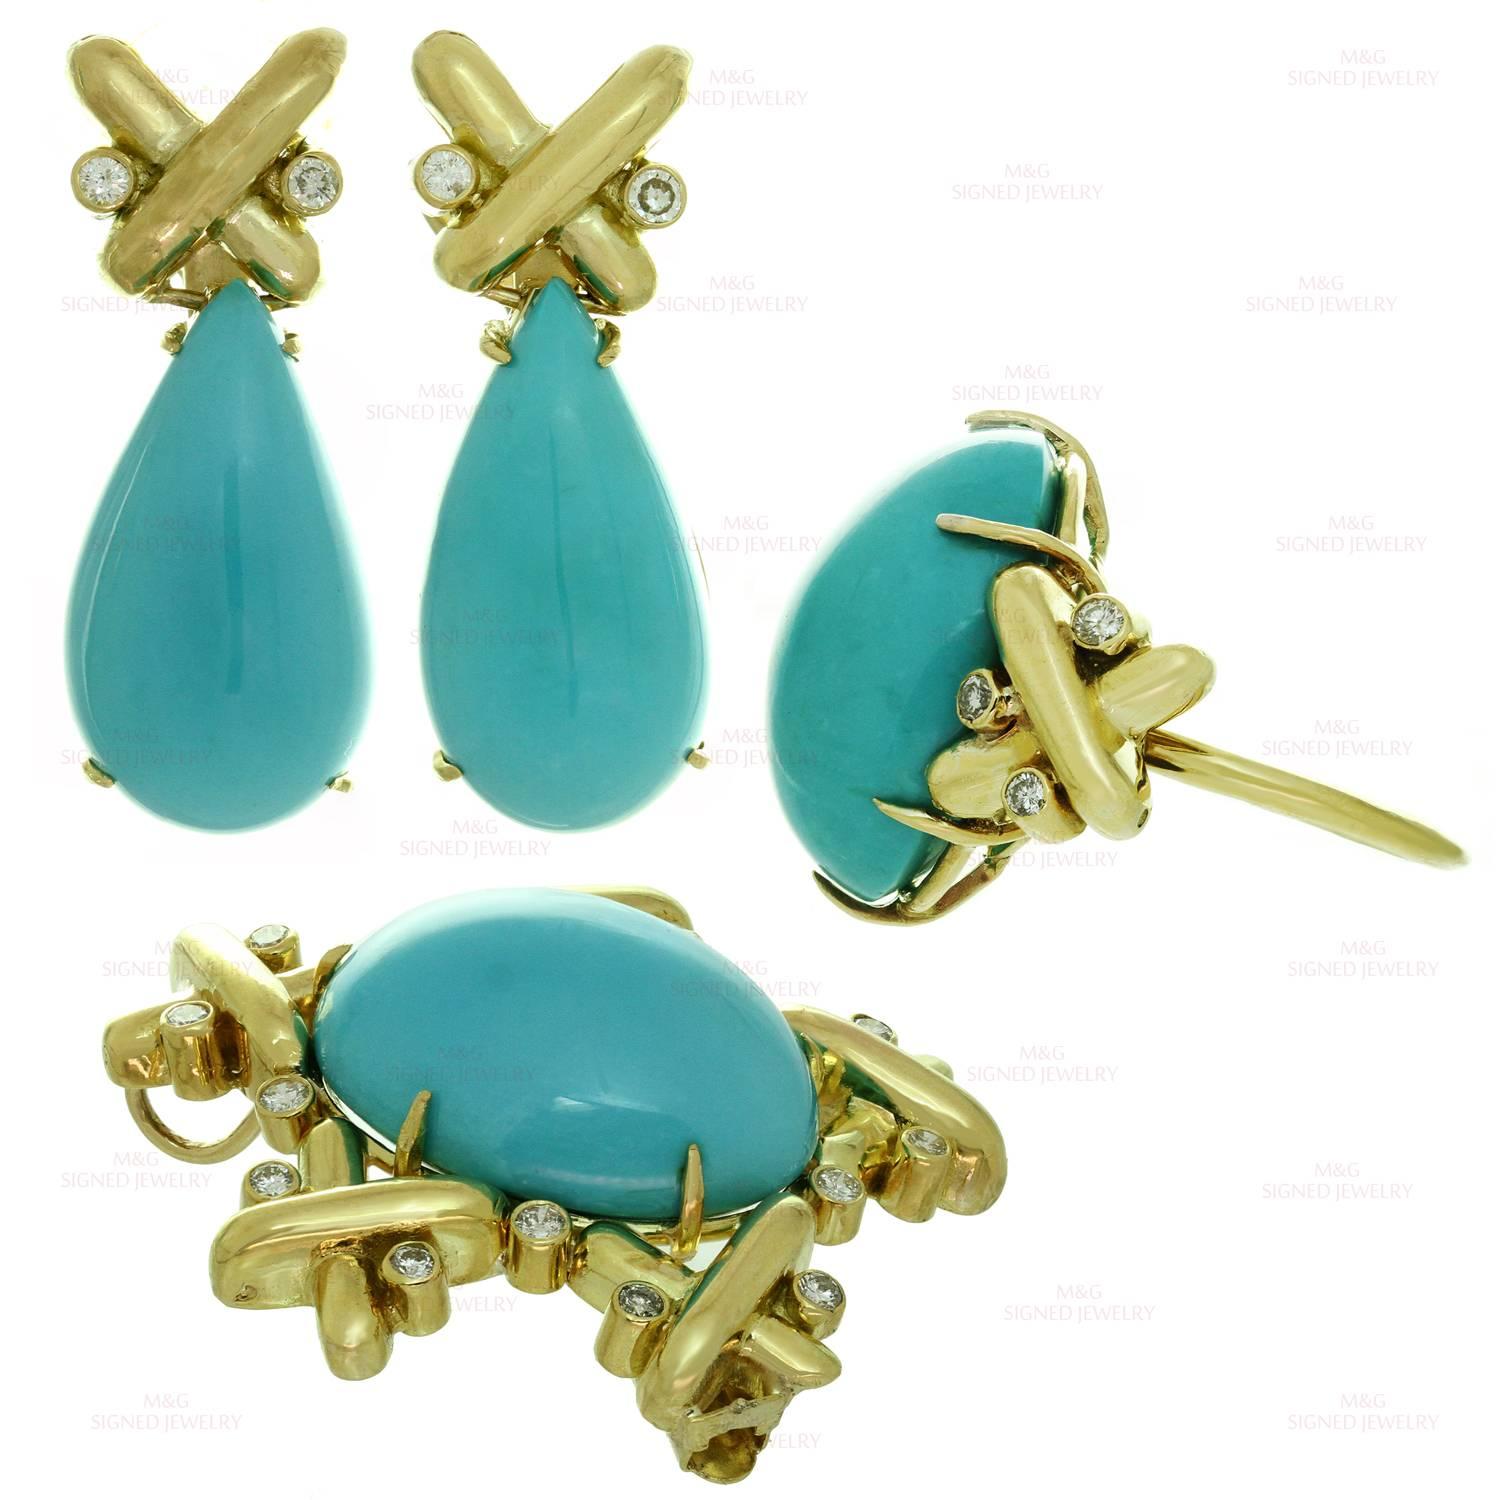 Turquoise Diamond Yellow Gold Detachable Brooch Necklace Ring and Earrings Set 2